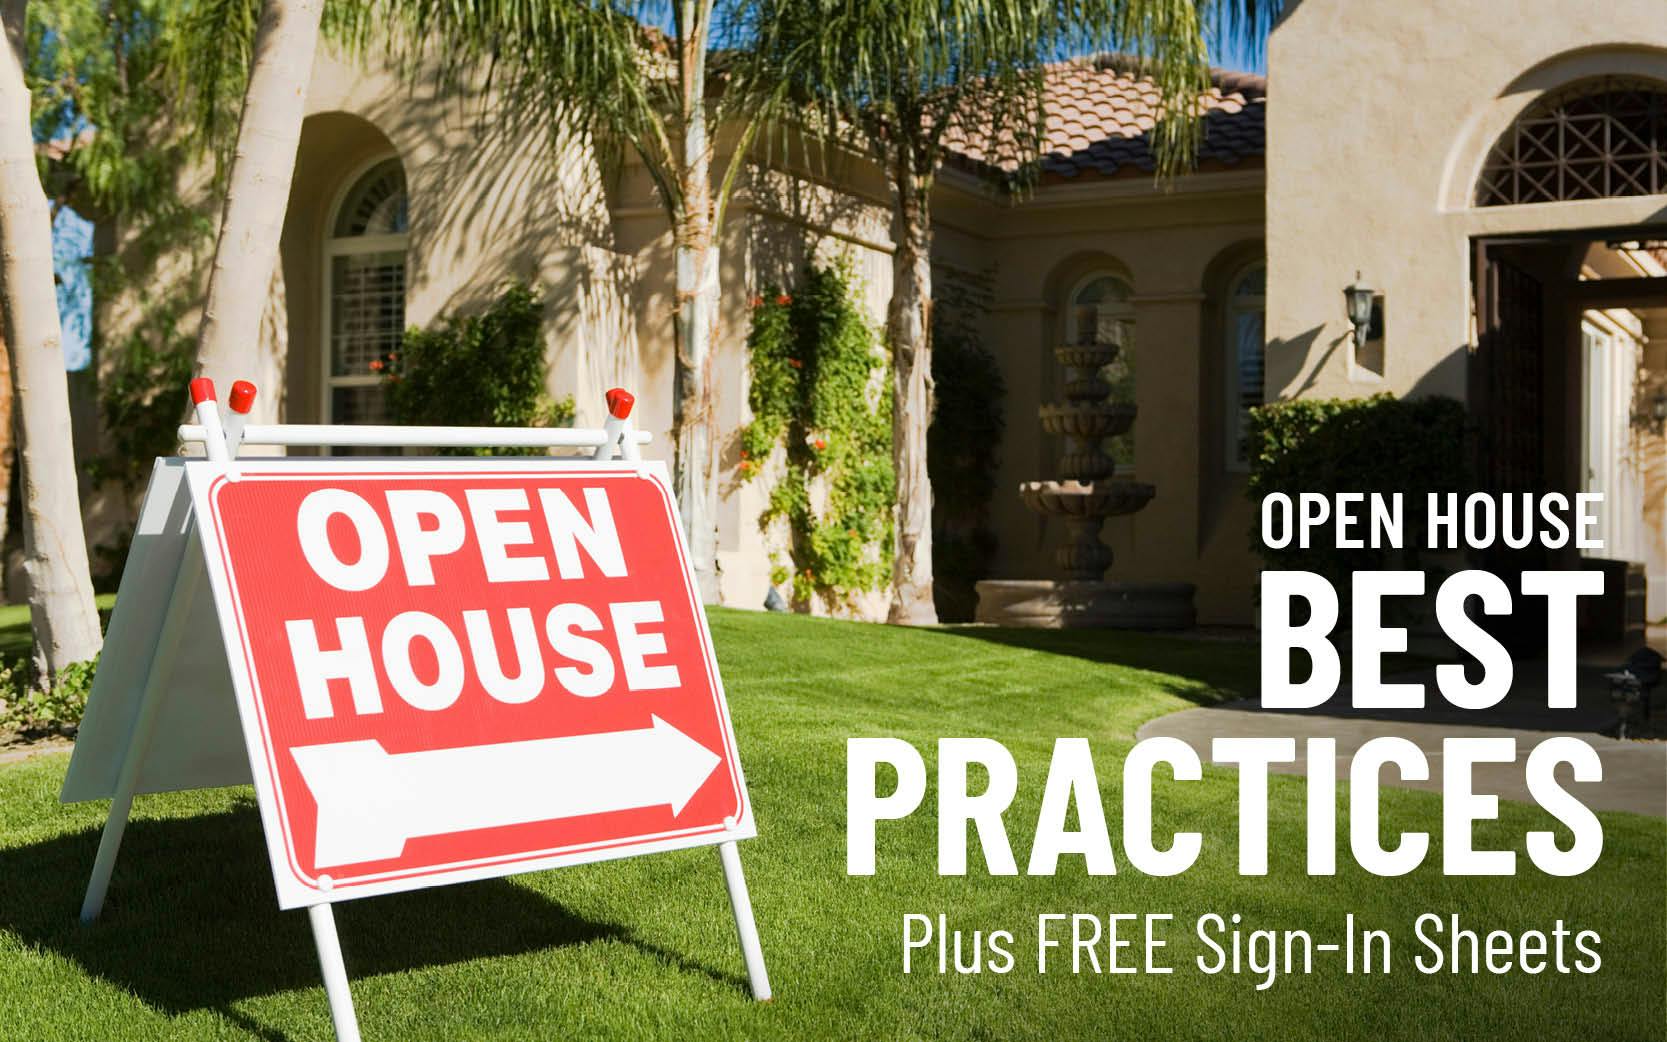 Open House Best Practices Plus FREE Sign-In Sheets